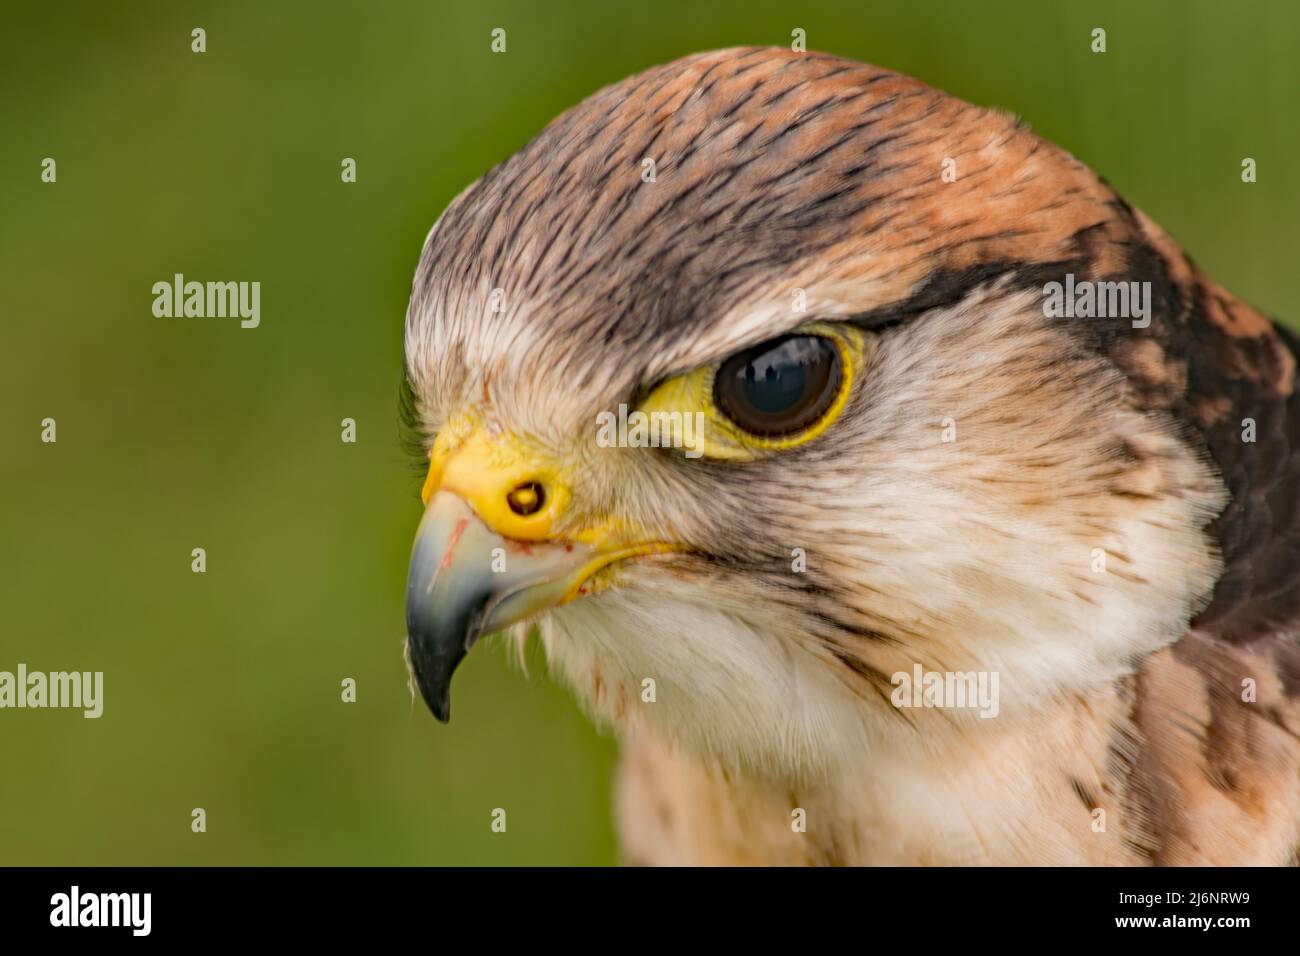 A close up of a resting  Falcon's Eye head with a reflecting eye Stock Photo